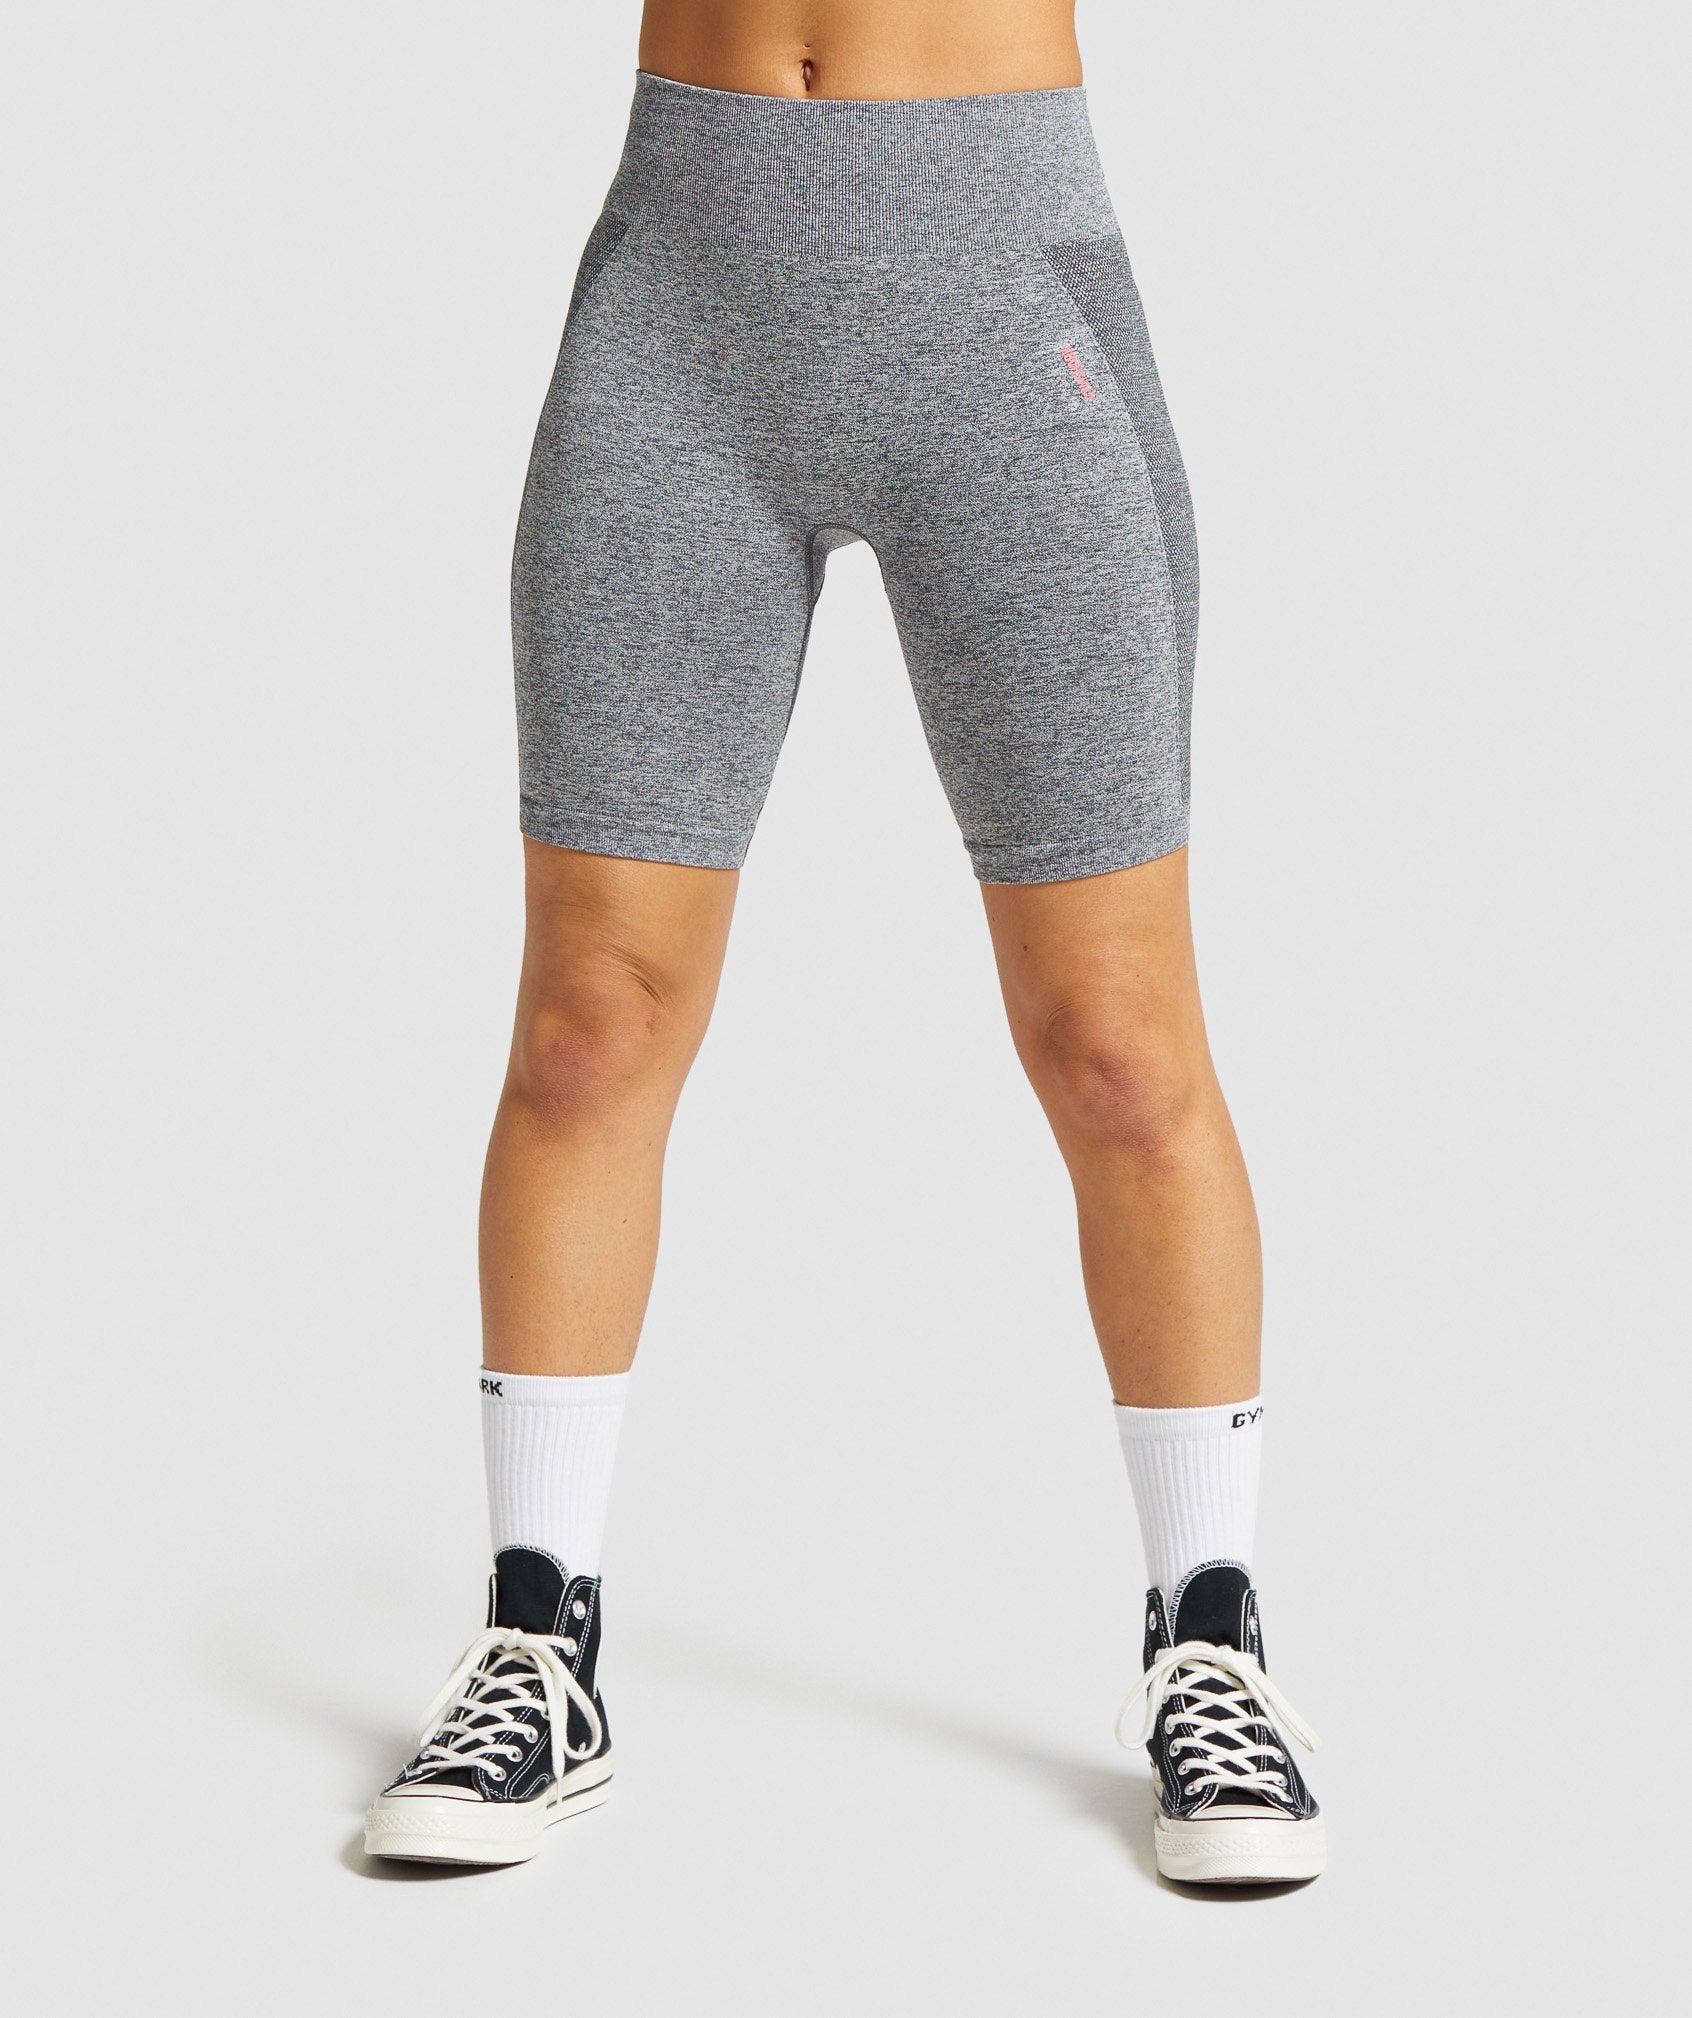 Flex Cycling Shorts in Charcoal Marl/Pink - view 1